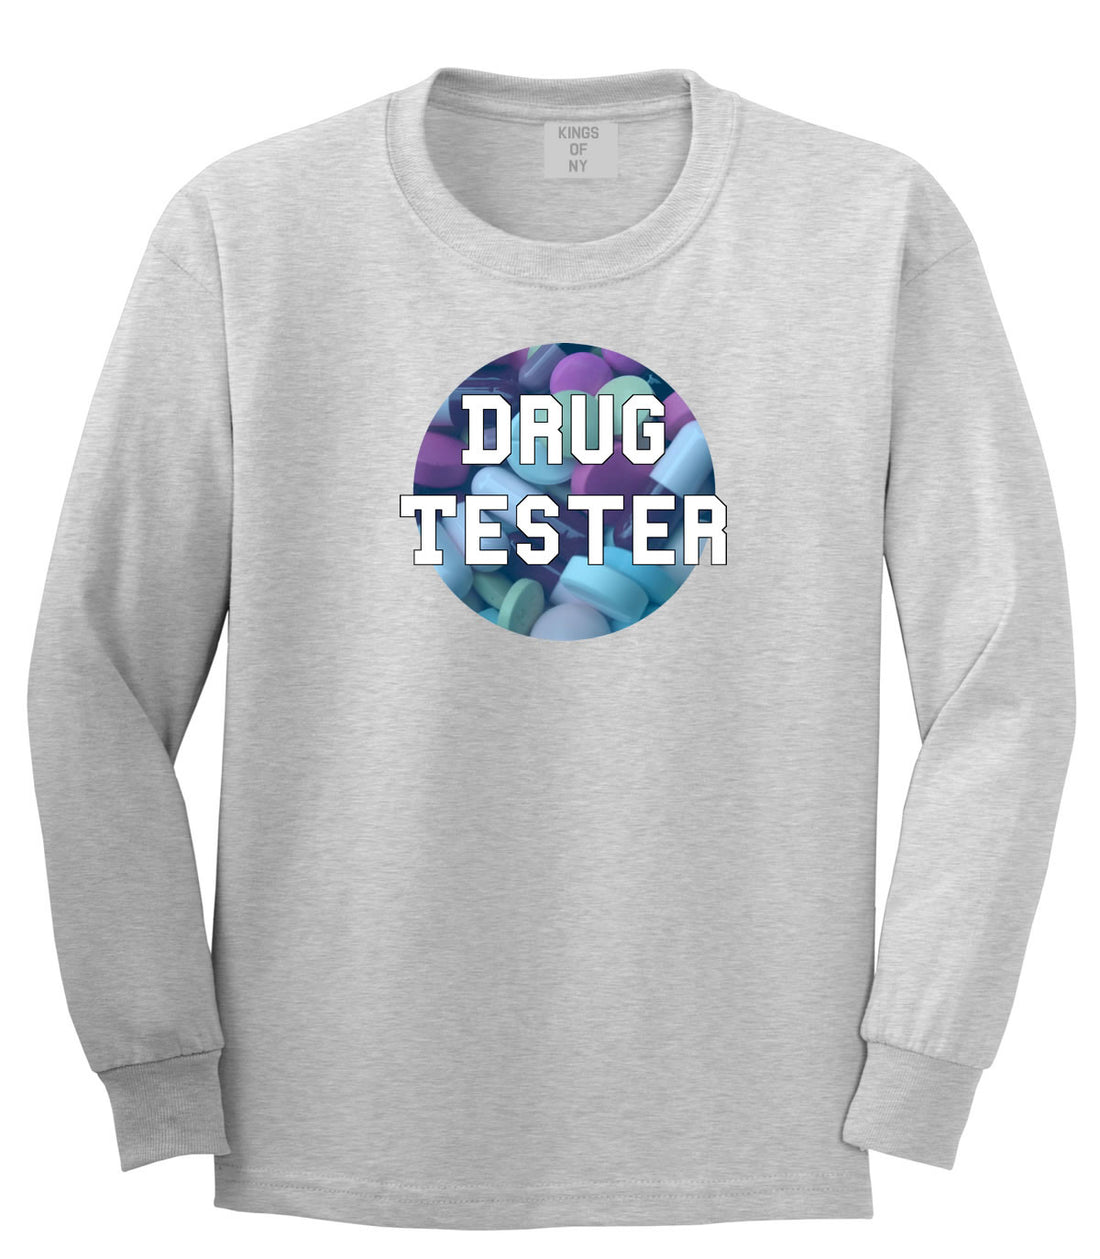 Drug tester weed smoking funny college Long Sleeve Boys Kids T-Shirt In Grey by Kings Of NY